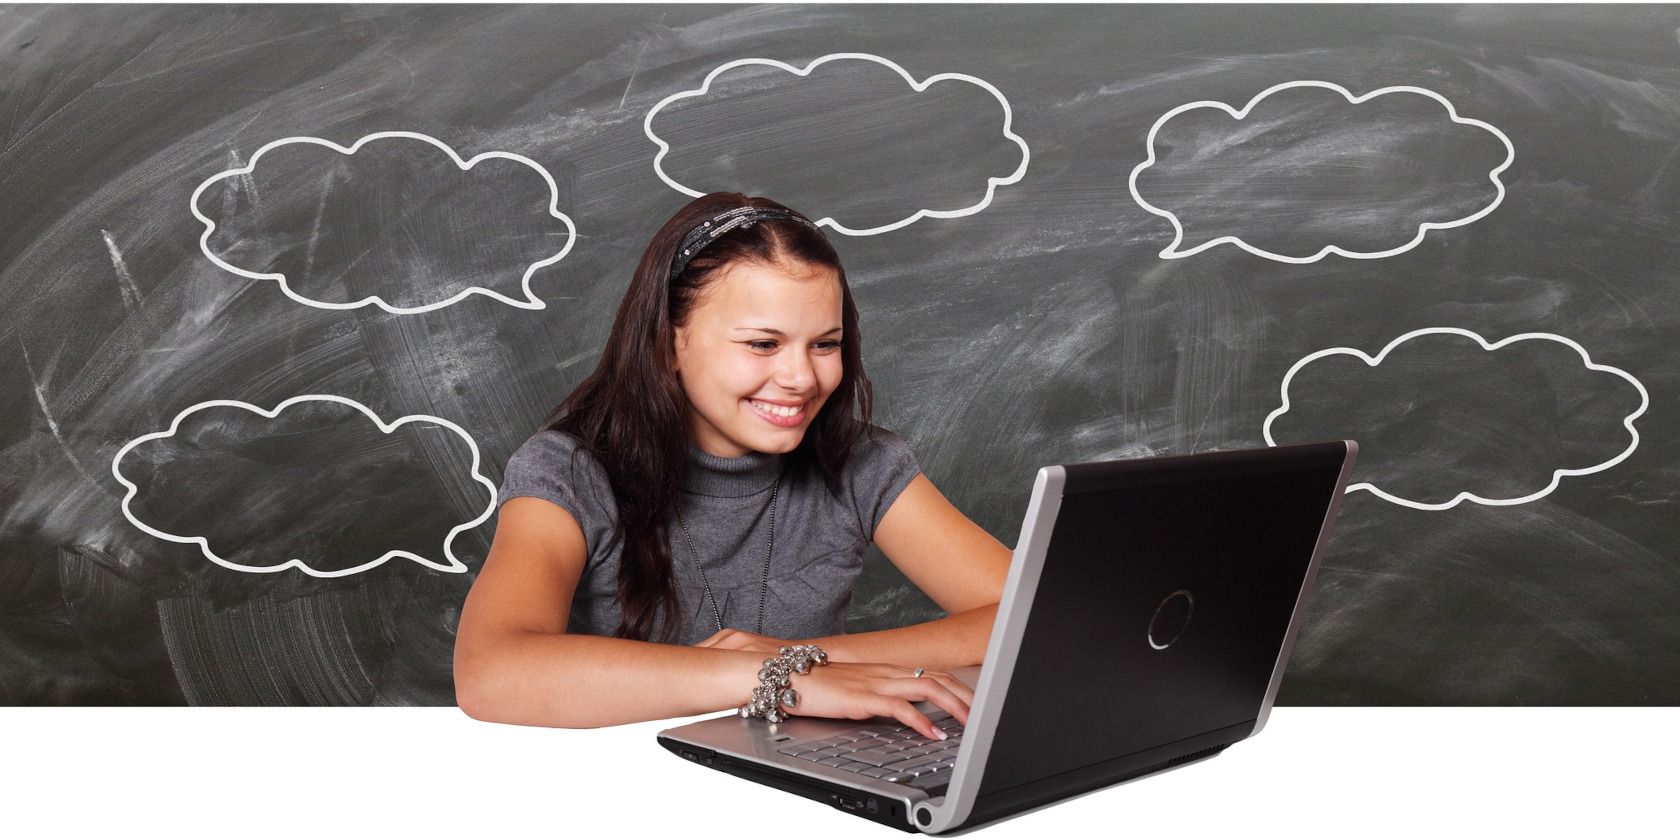 lady smiling at laptop with cloud drawings around her